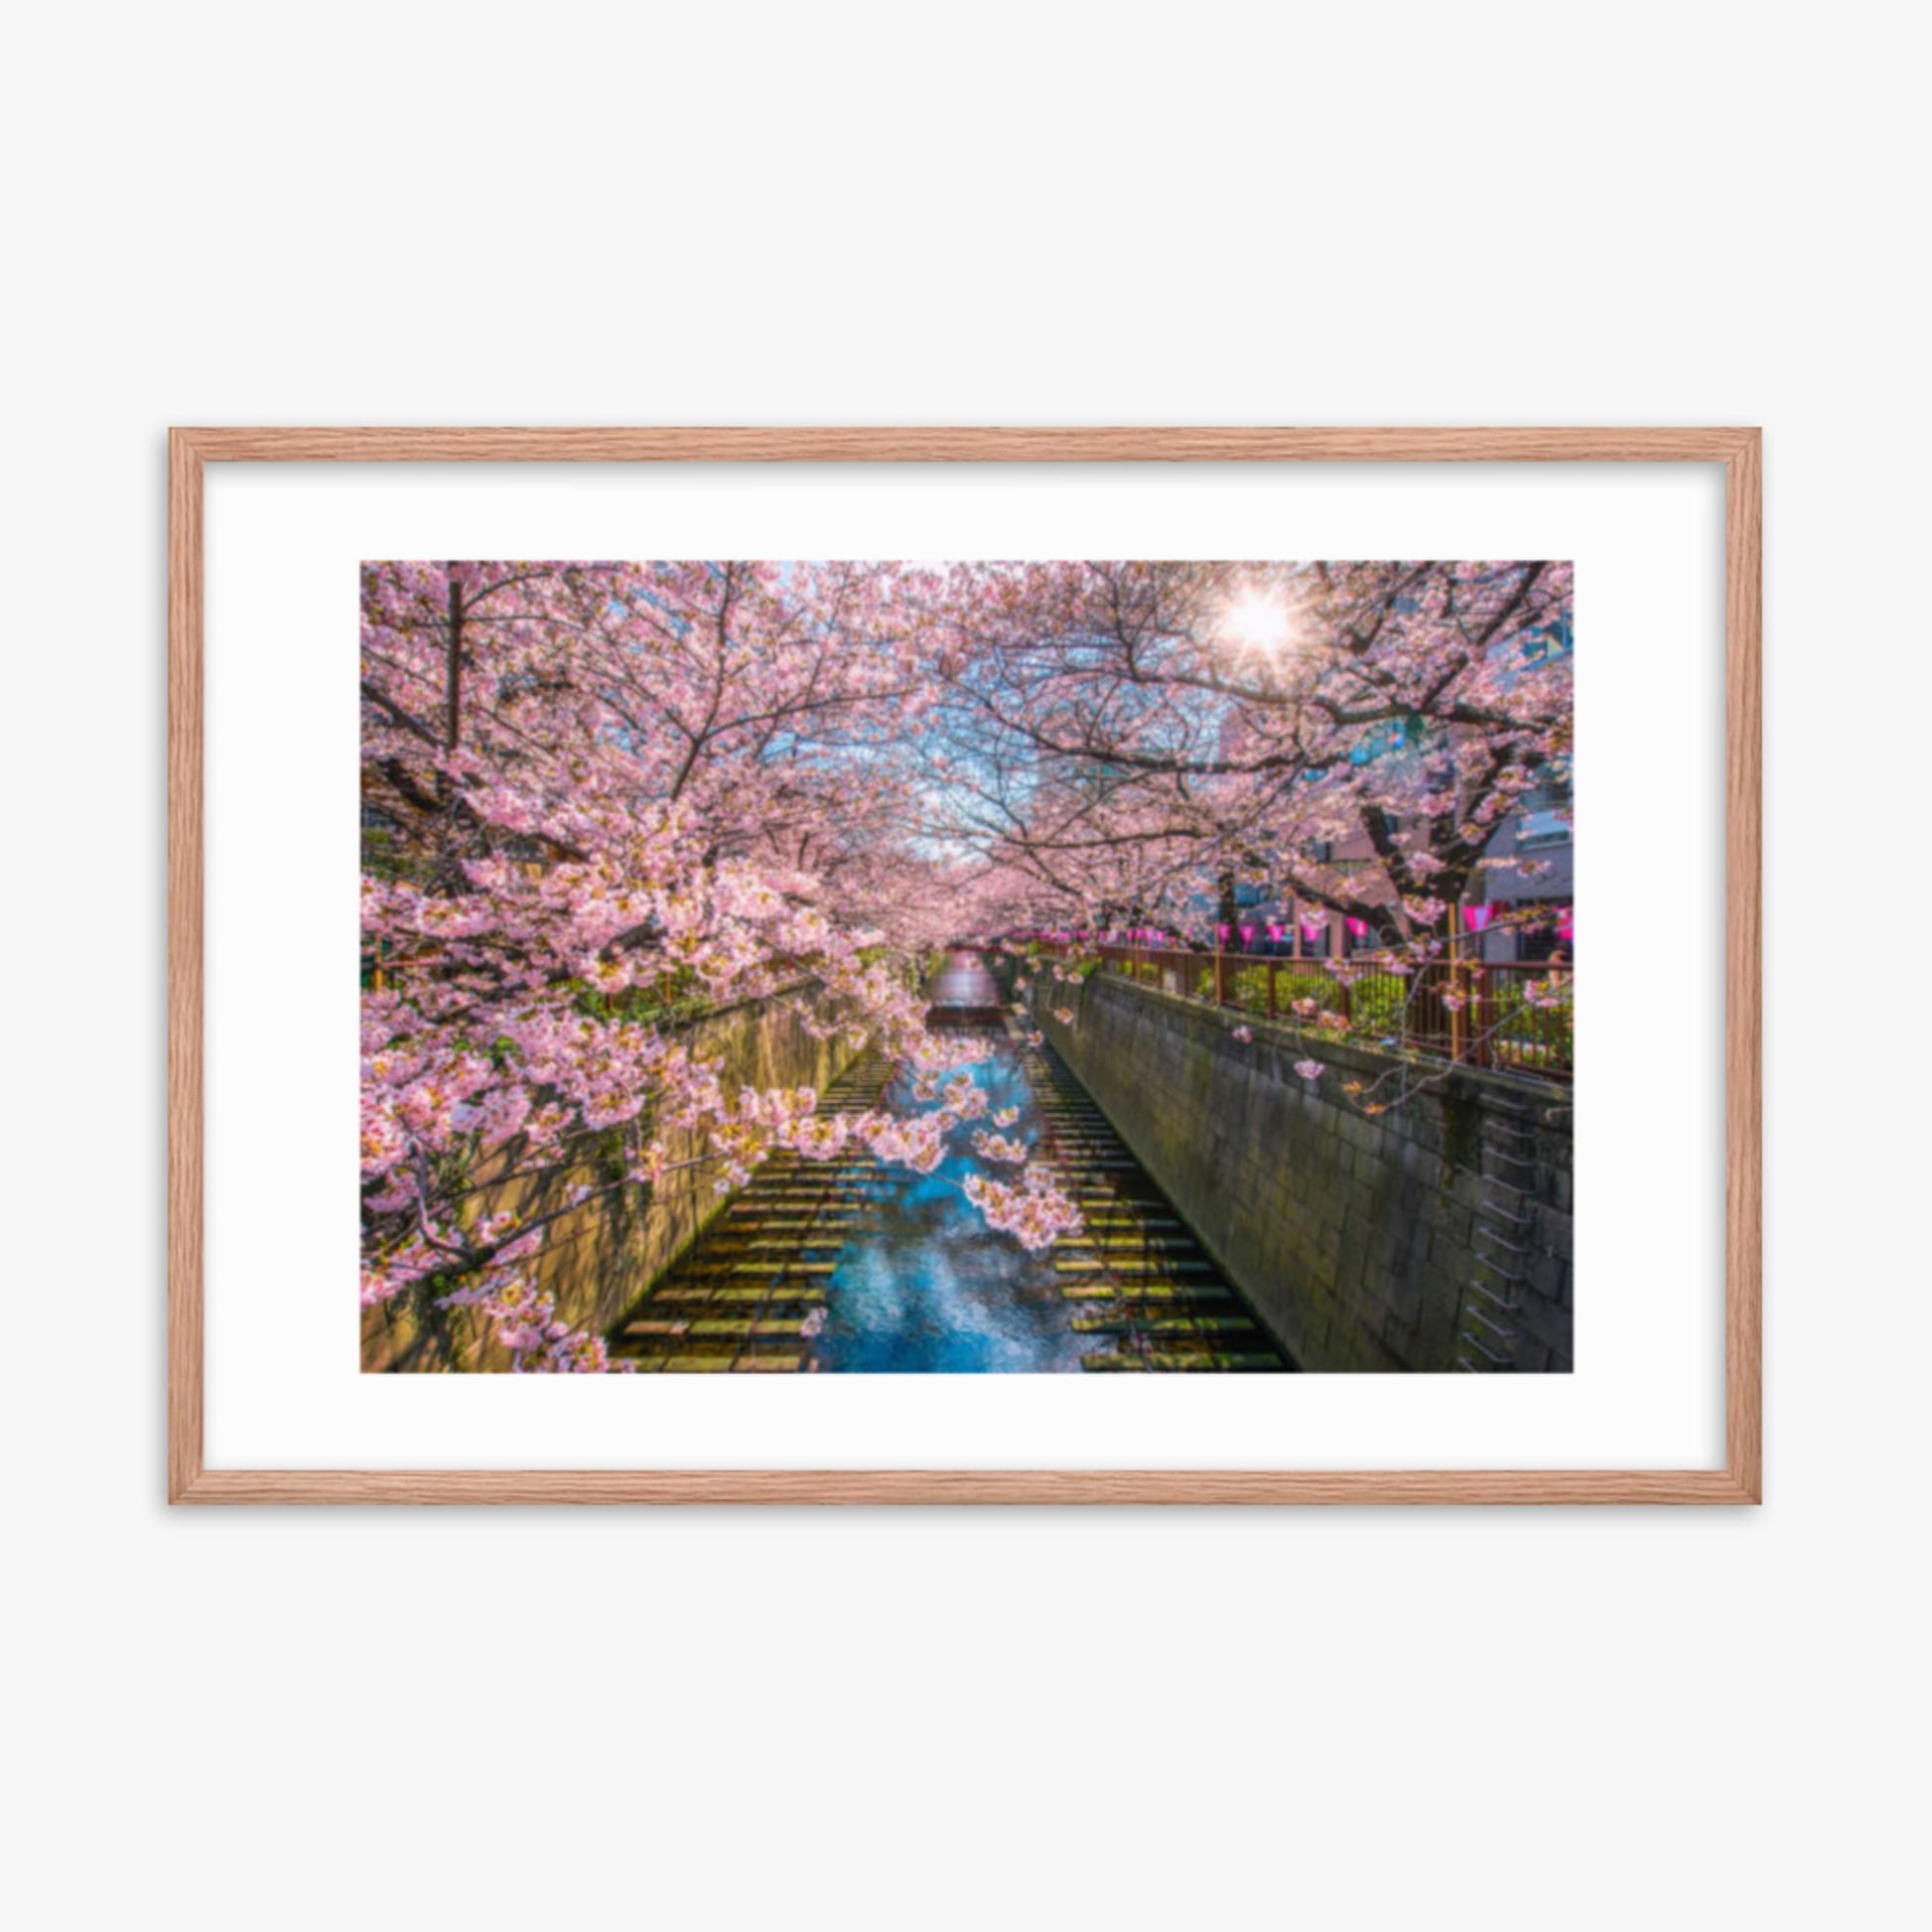 Cherry blossom sakura lined Meguro Canal in Tokyo 24x36 in Poster With Oak Frame